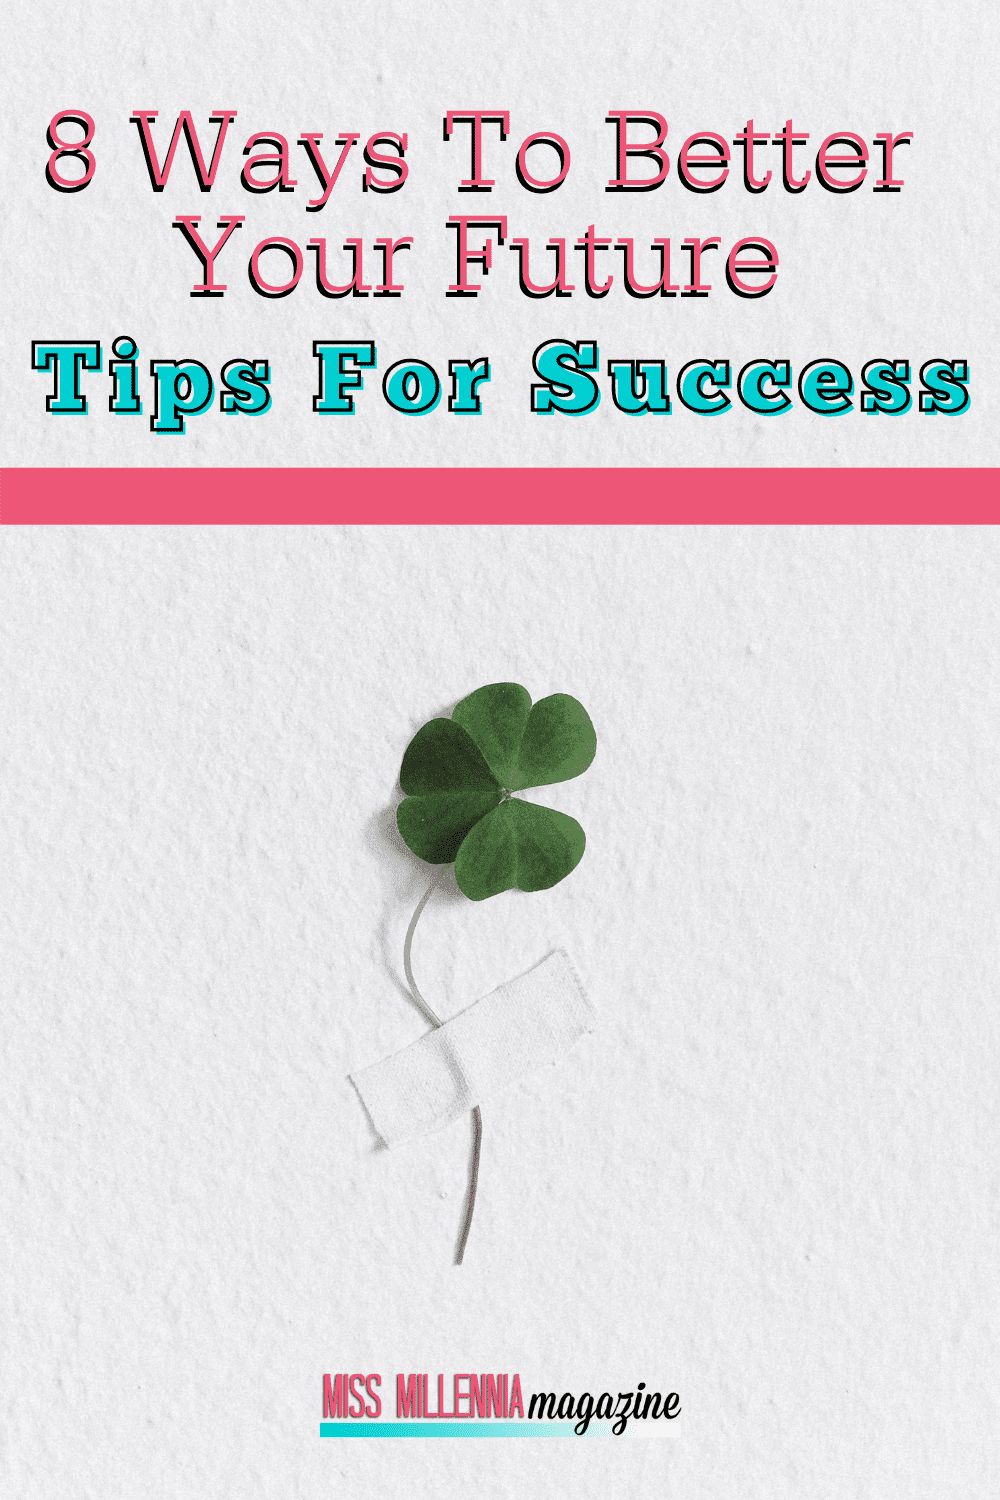 8 Ways To Better Your Future: Tips For Success